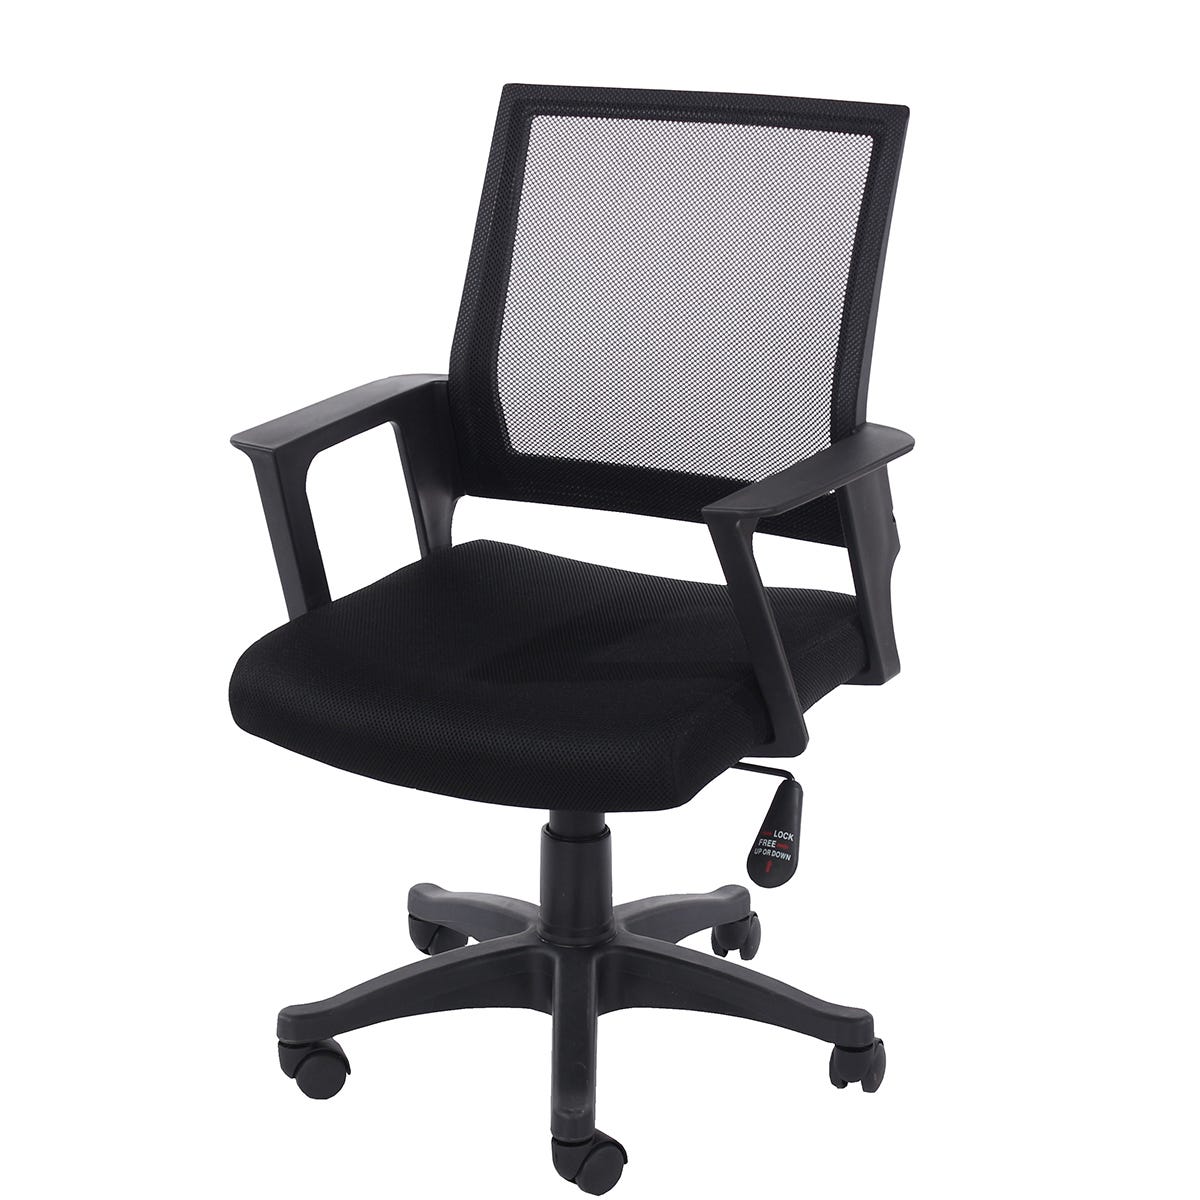 Core Products Corinthia Loft Home Office Chair with Mesh Back - Black